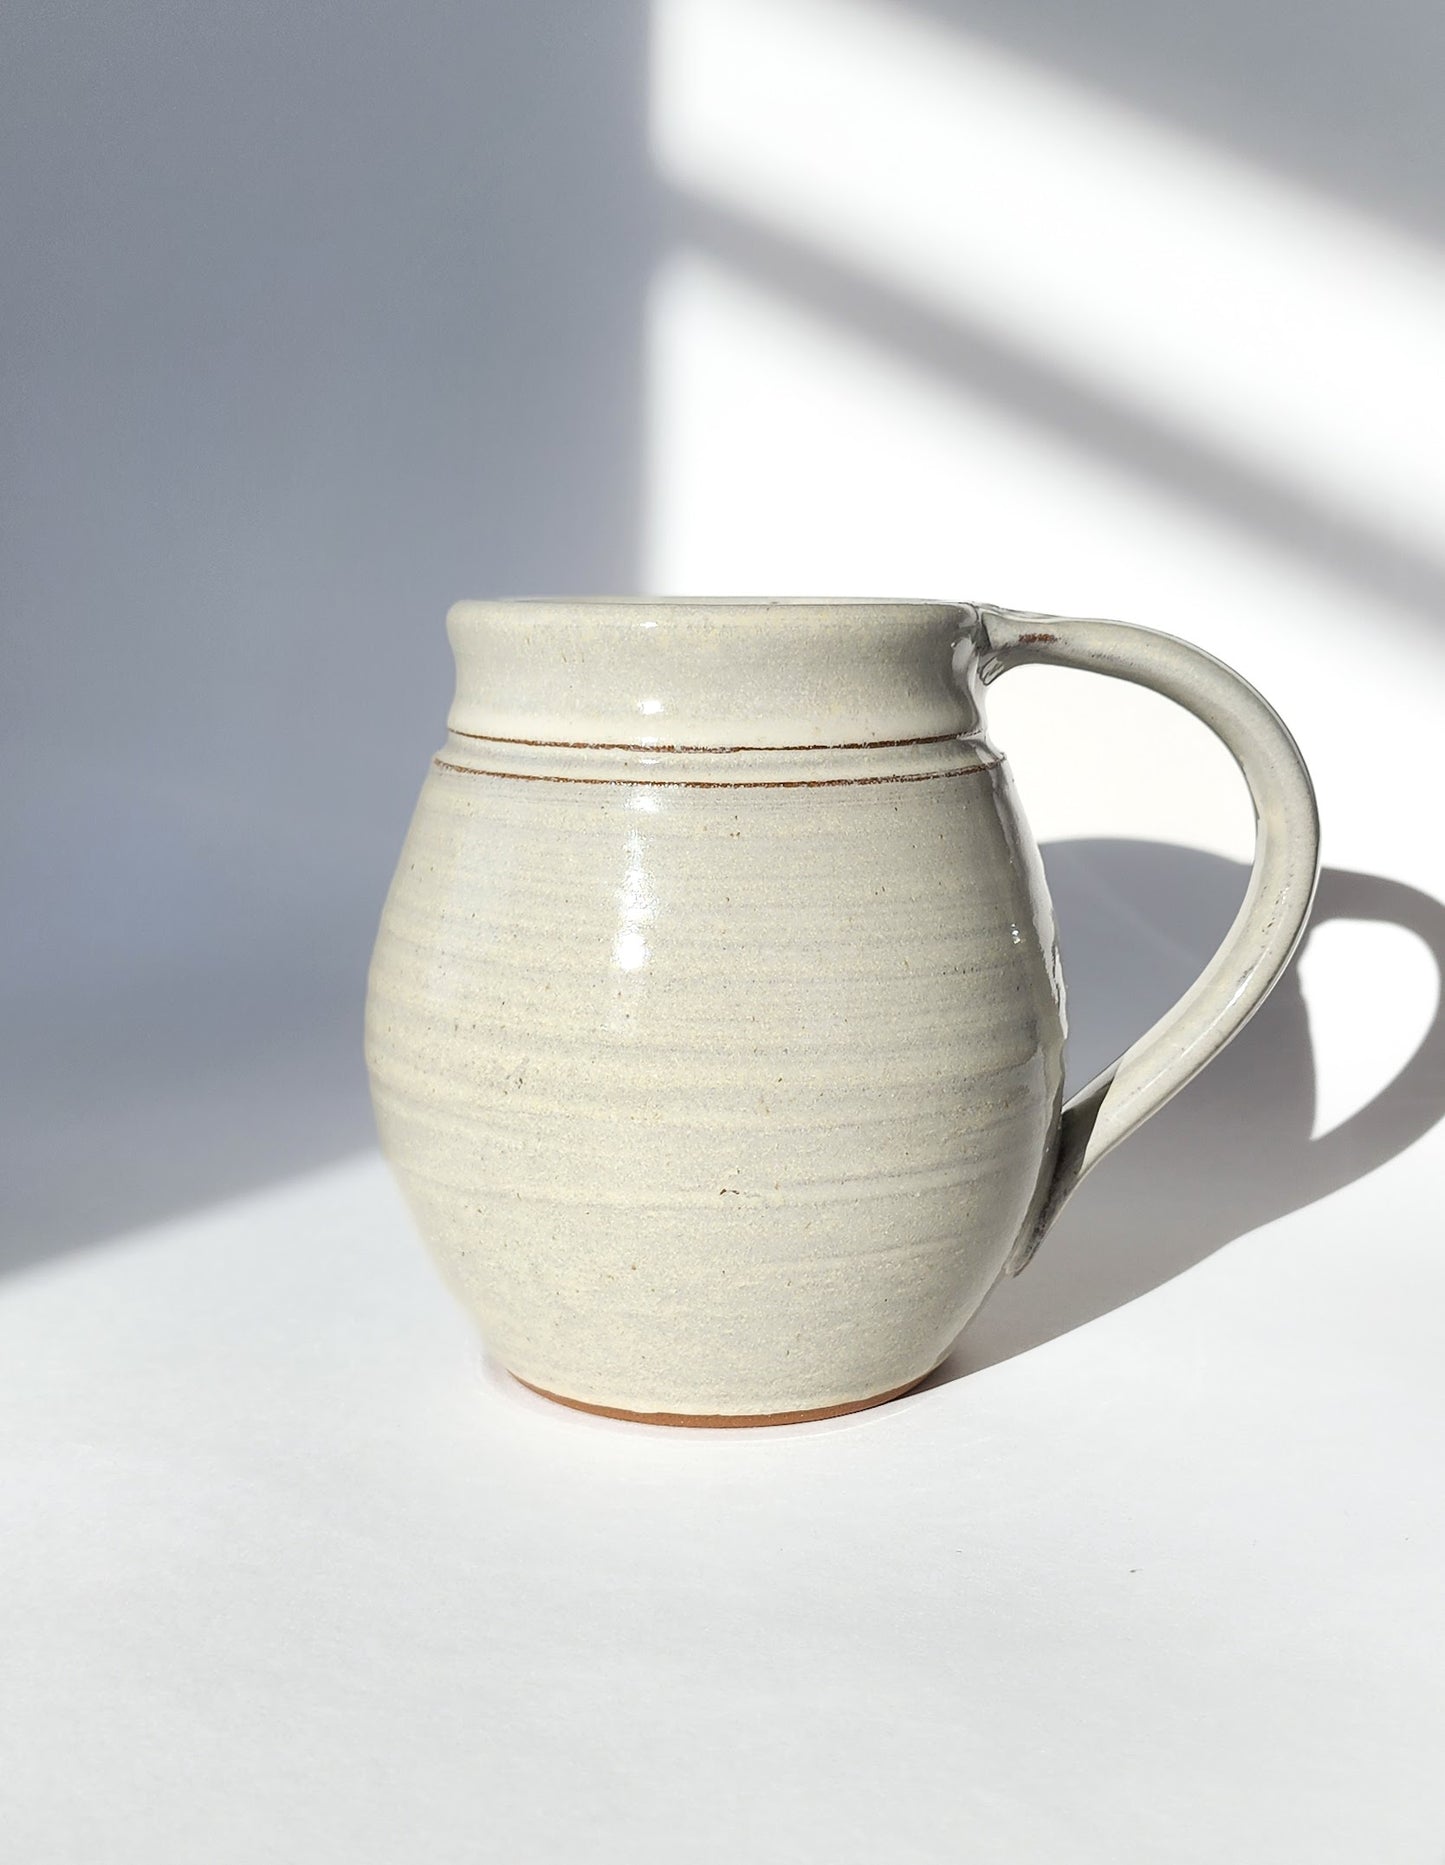 Image: Clinton Pottery's 30 oz Jumbo Mug in White – A classic and generously sized addition to your kitchen, this machine washable mug seamlessly blends artistry with functionality. The timeless White color adds a clean and versatile touch, reminiscent of simplicity and clarity. Perfect for enjoying ample servings of your favorite coffee or tea with understated elegance.